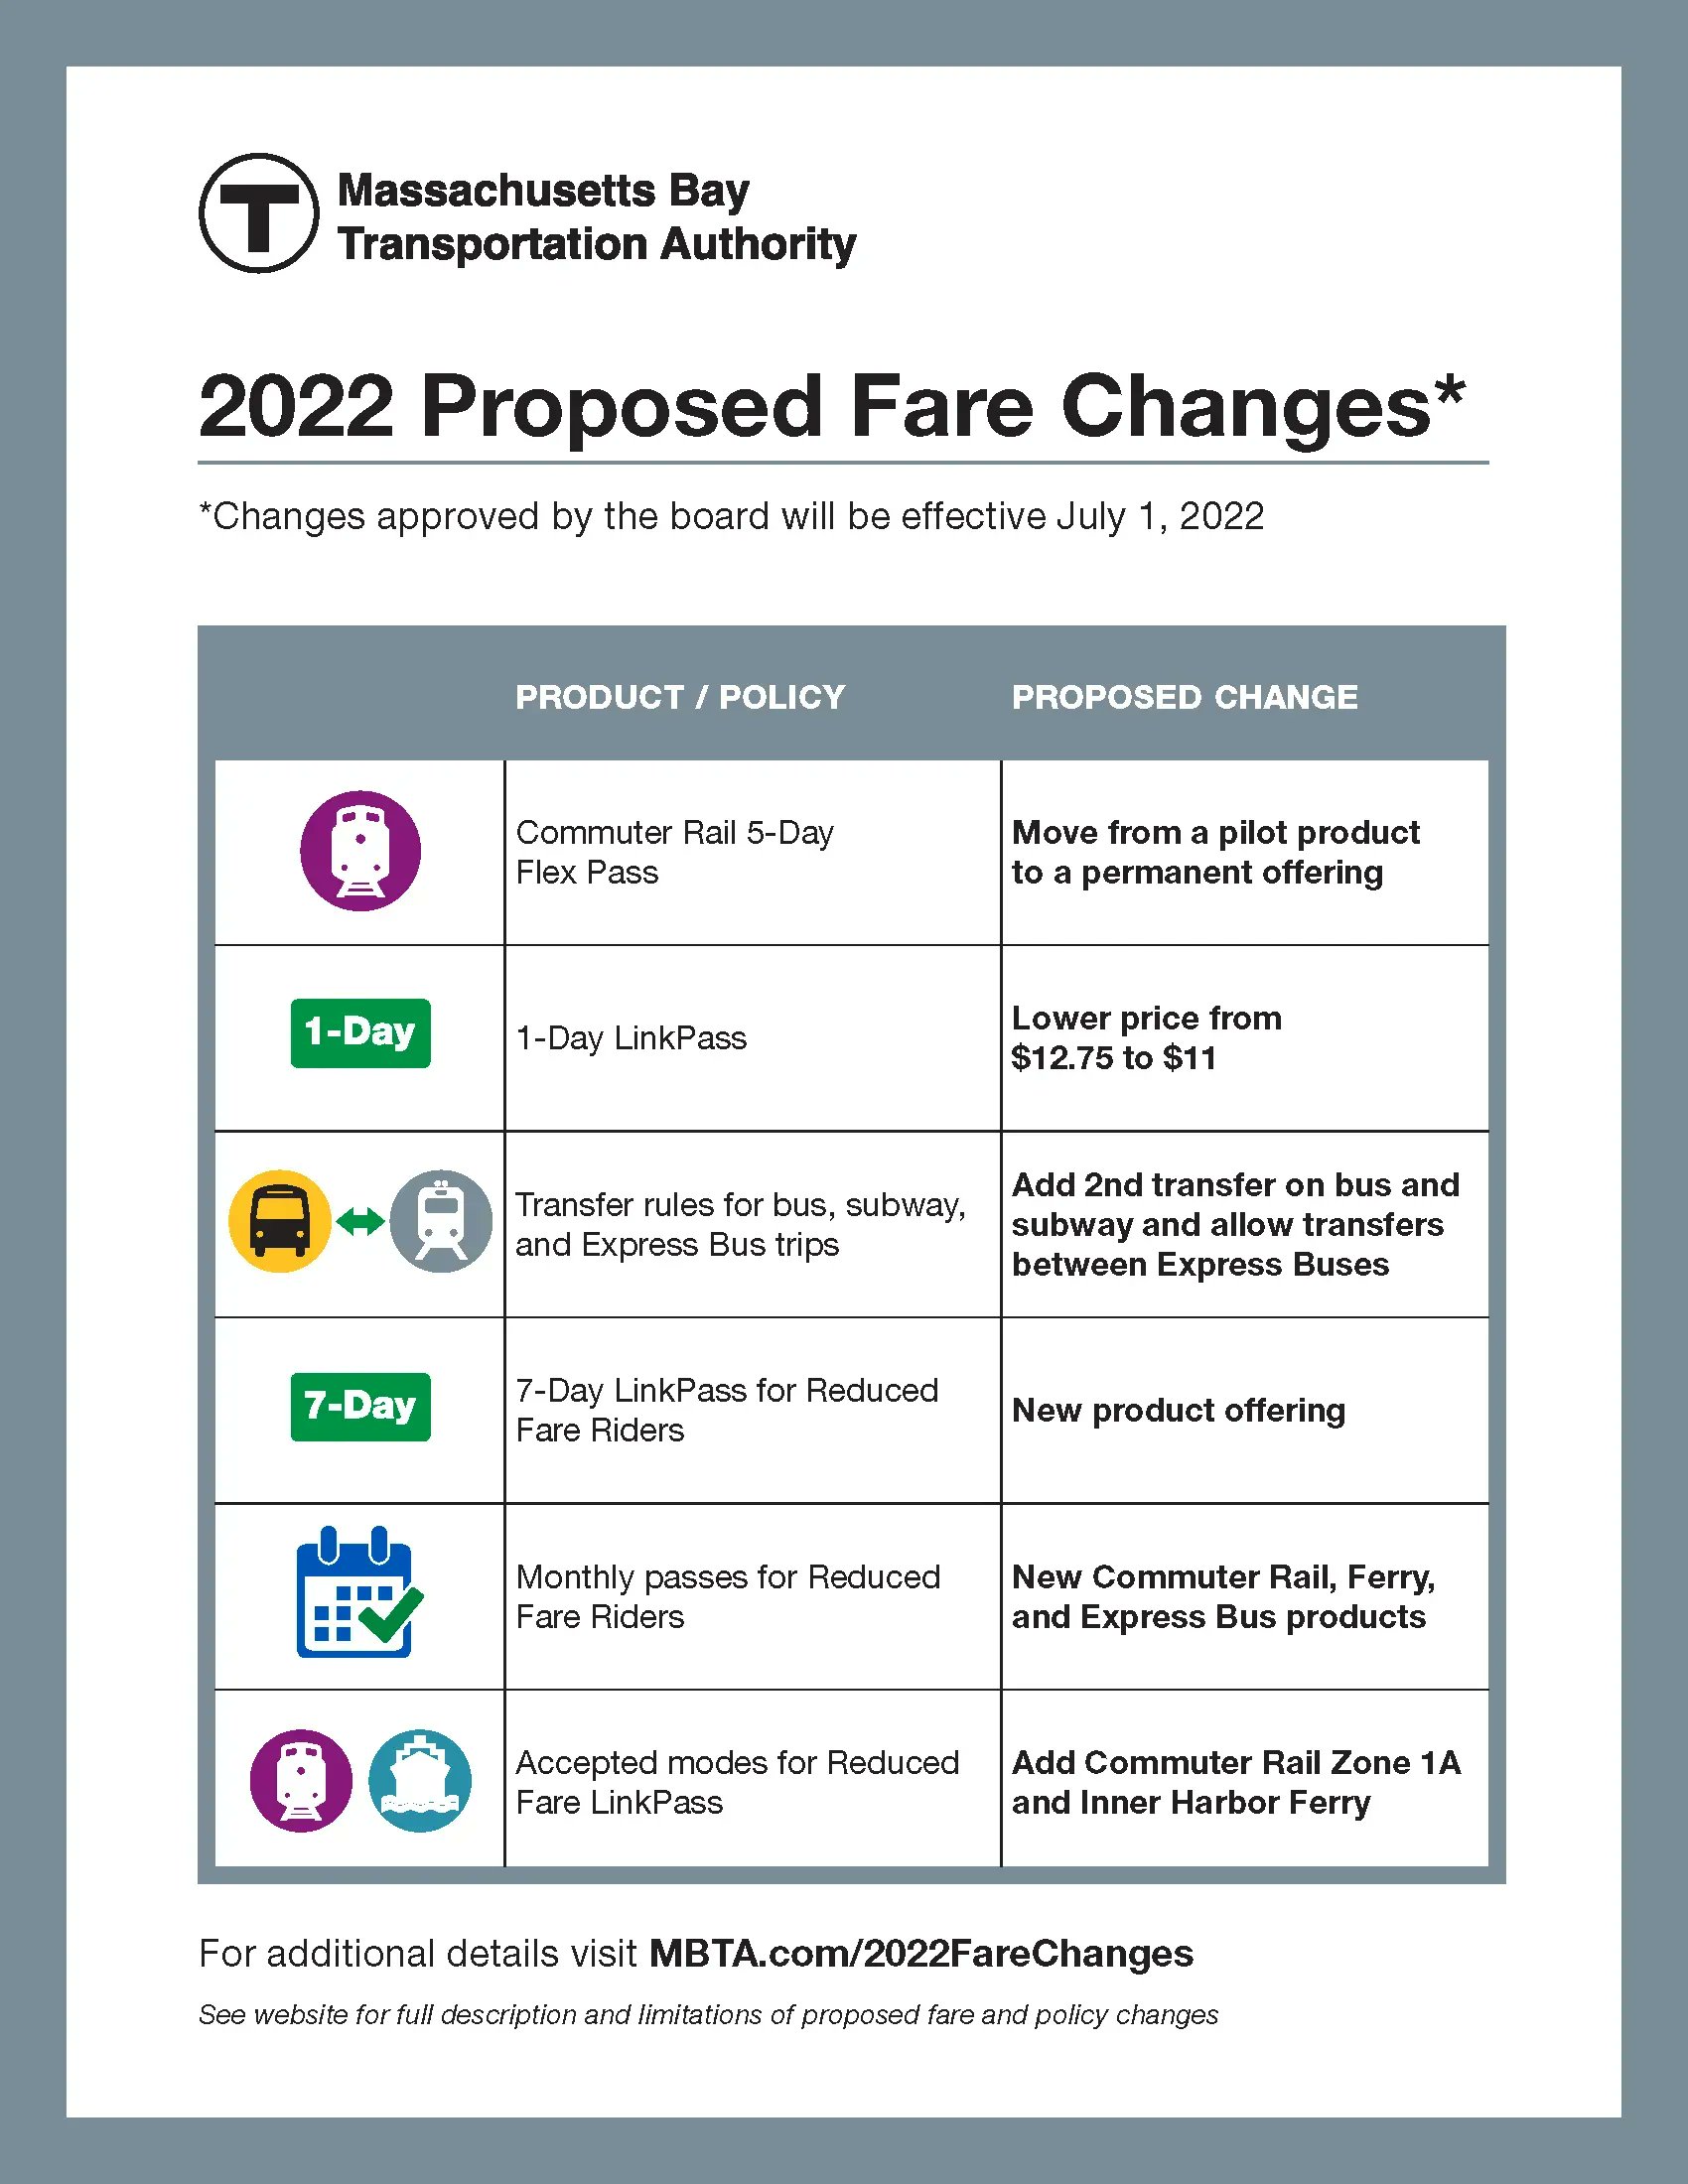 Town of Franklin: MBTA proposed fare changes for 2022